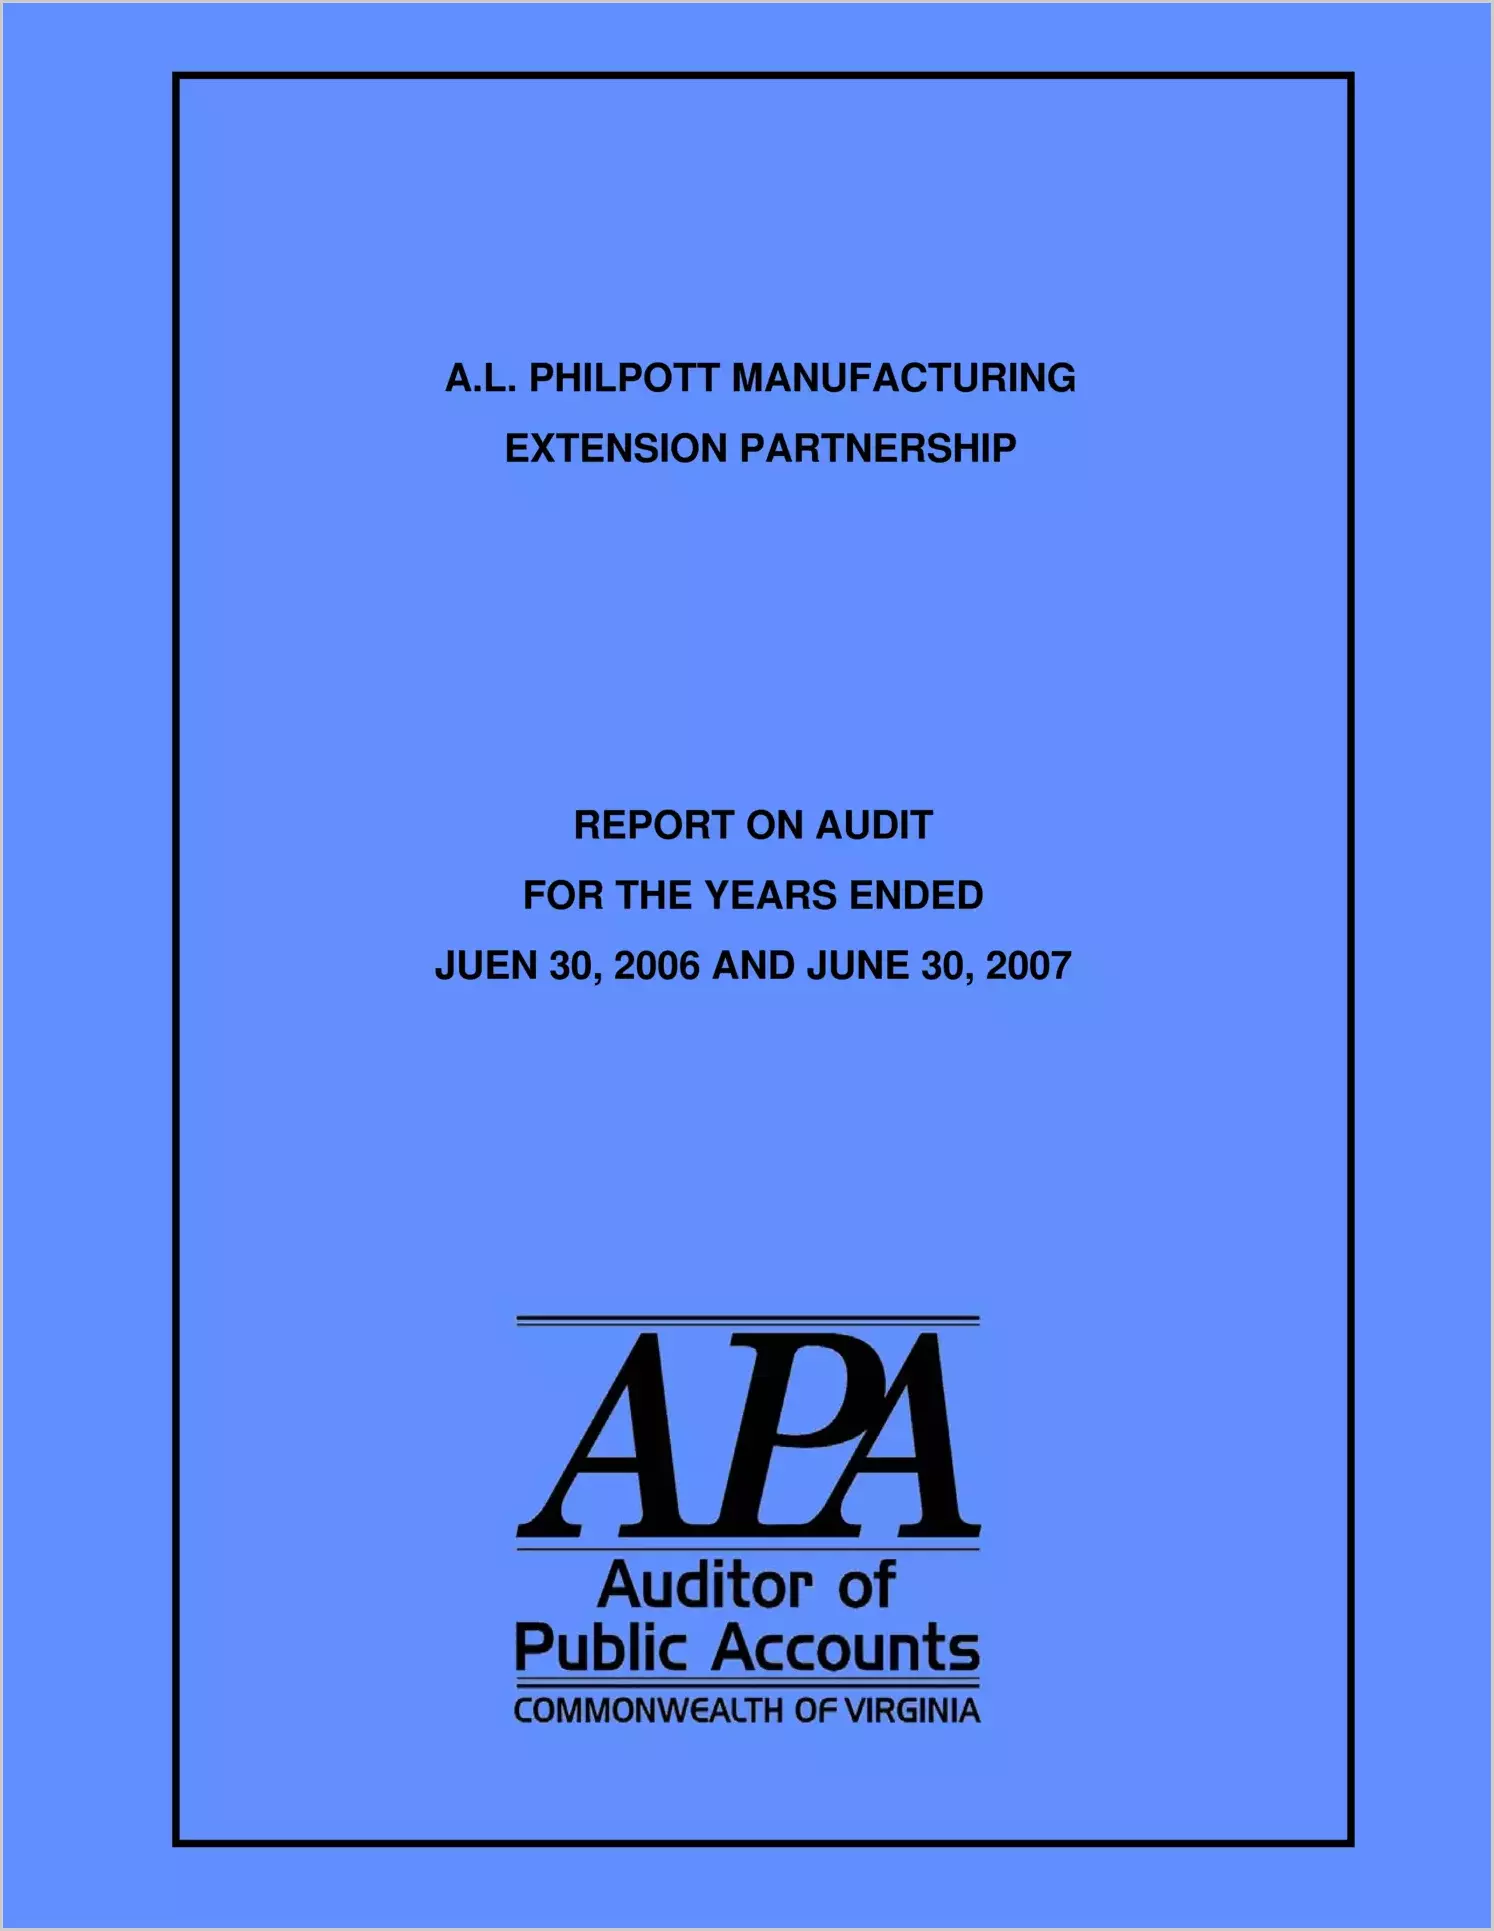 A.L. Philpott Manufacturing Extension Partnership report on Audit for the years ended June 30, 2006 and June 30, 2007.